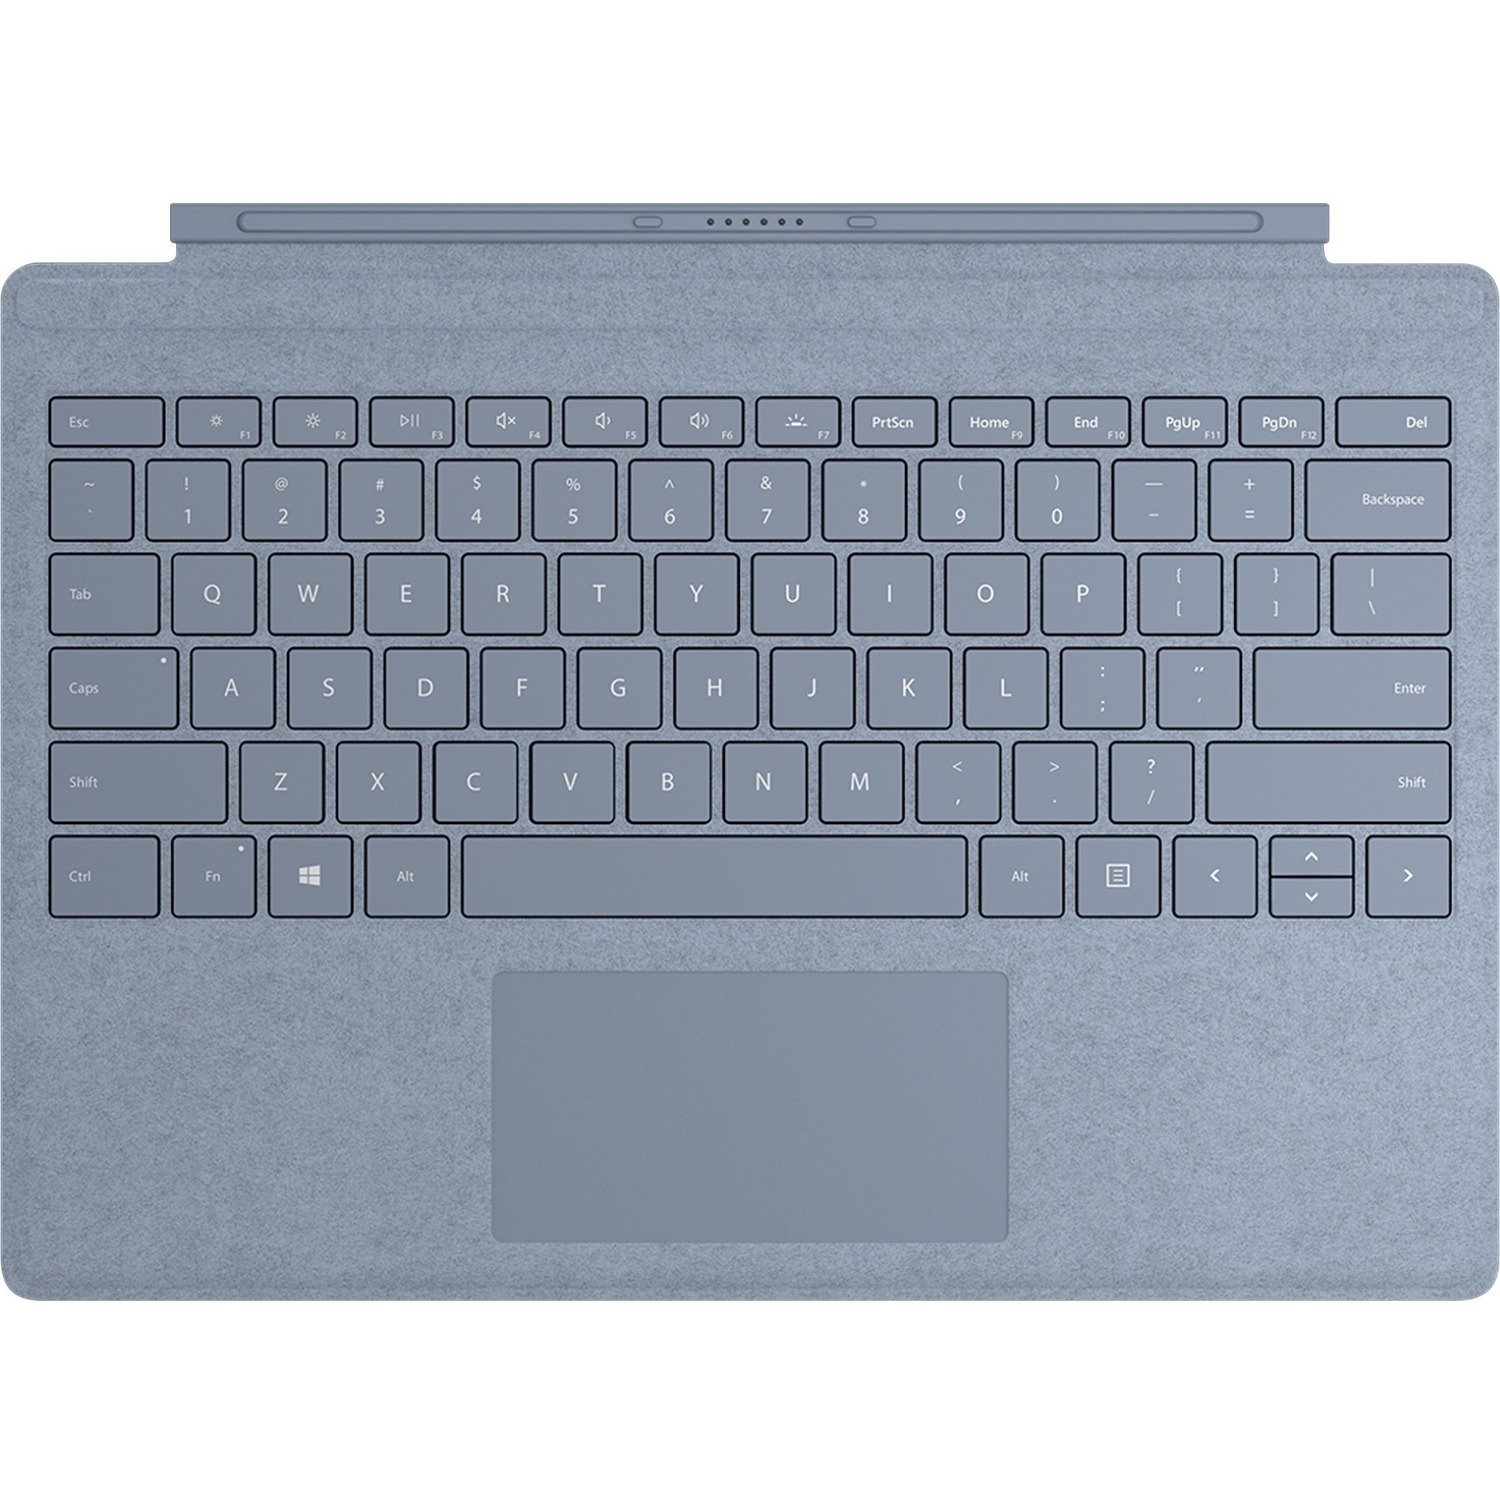 Microsoft Signature Type Cover Keyboard/Cover Case Microsoft Surface Pro, Surface Pro 7, Surface Pro 3, Surface Pro 4, Surface Pro (5th Gen), Surface Pro 6 Tablet - Ice Blue